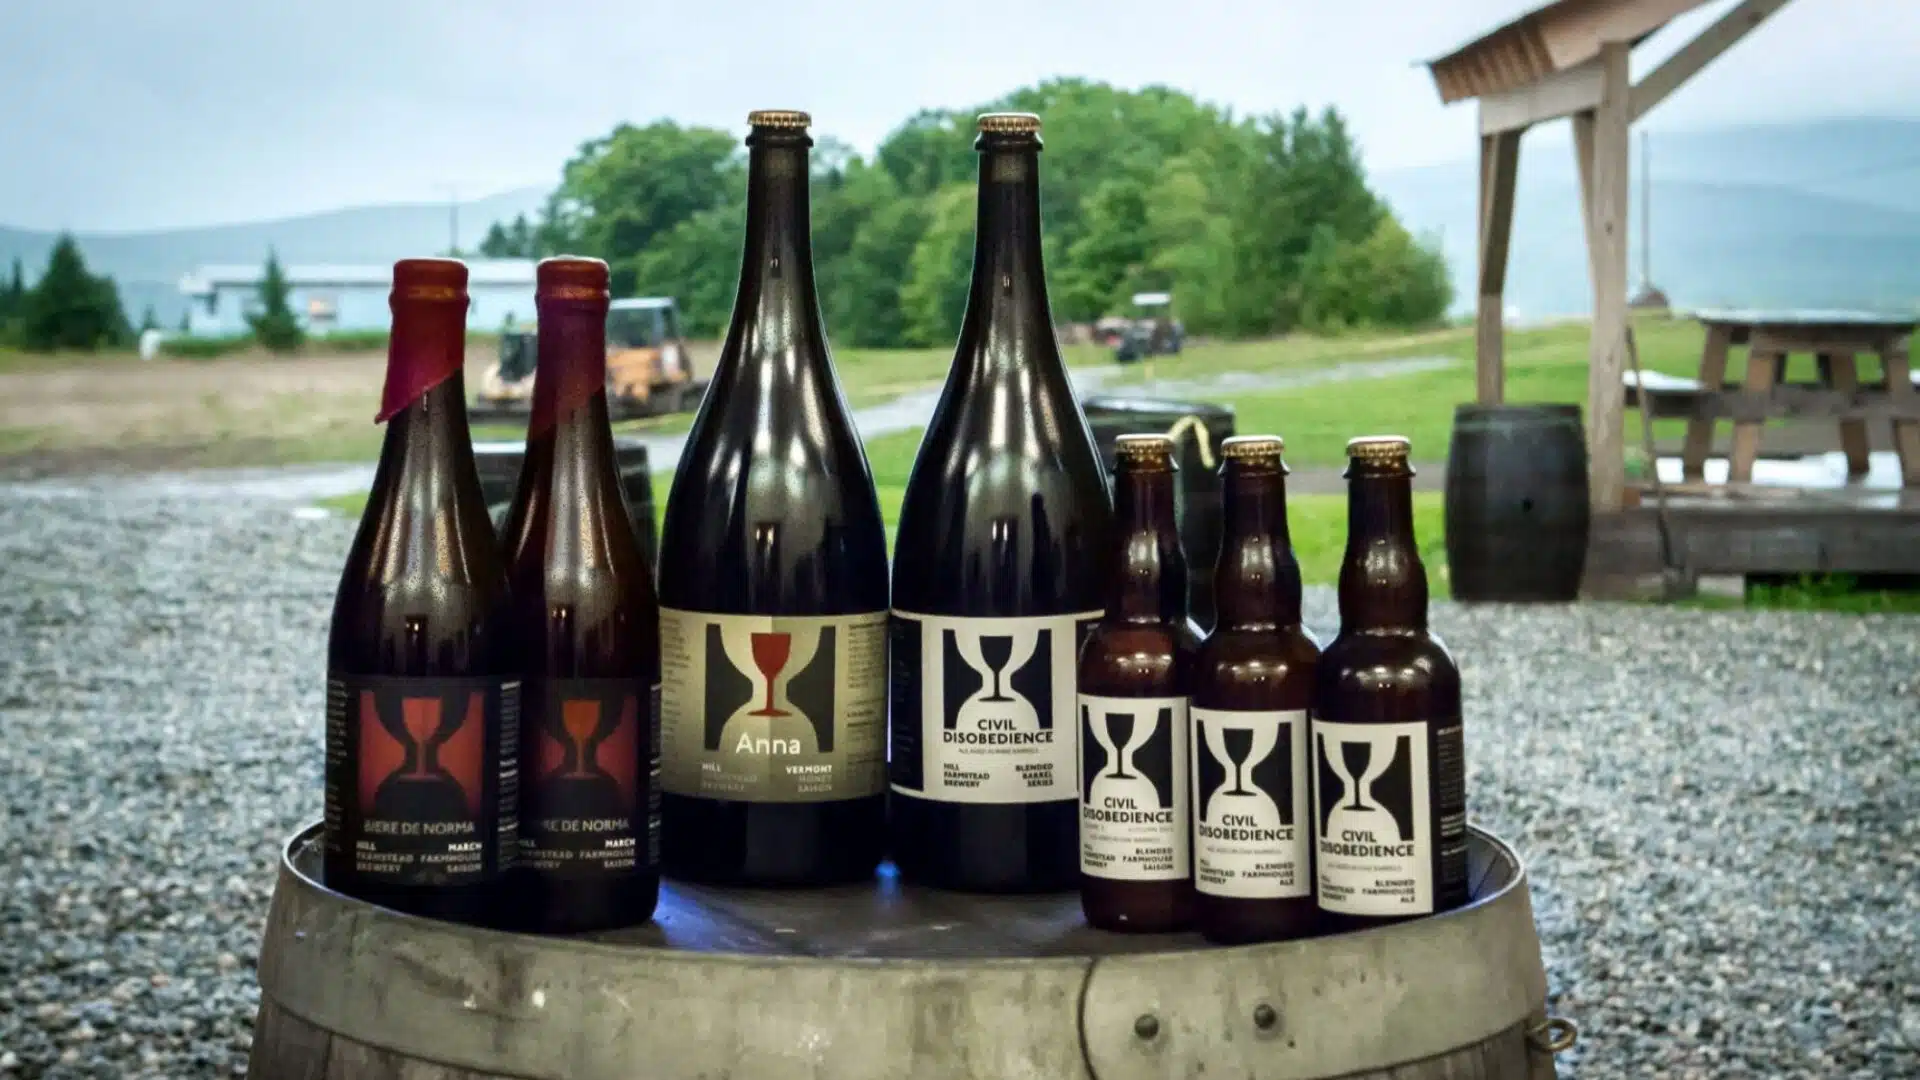 bottles of Hill Farmstead Beer in Vermont|hundreds of people on a tented field enjoying a beer festival